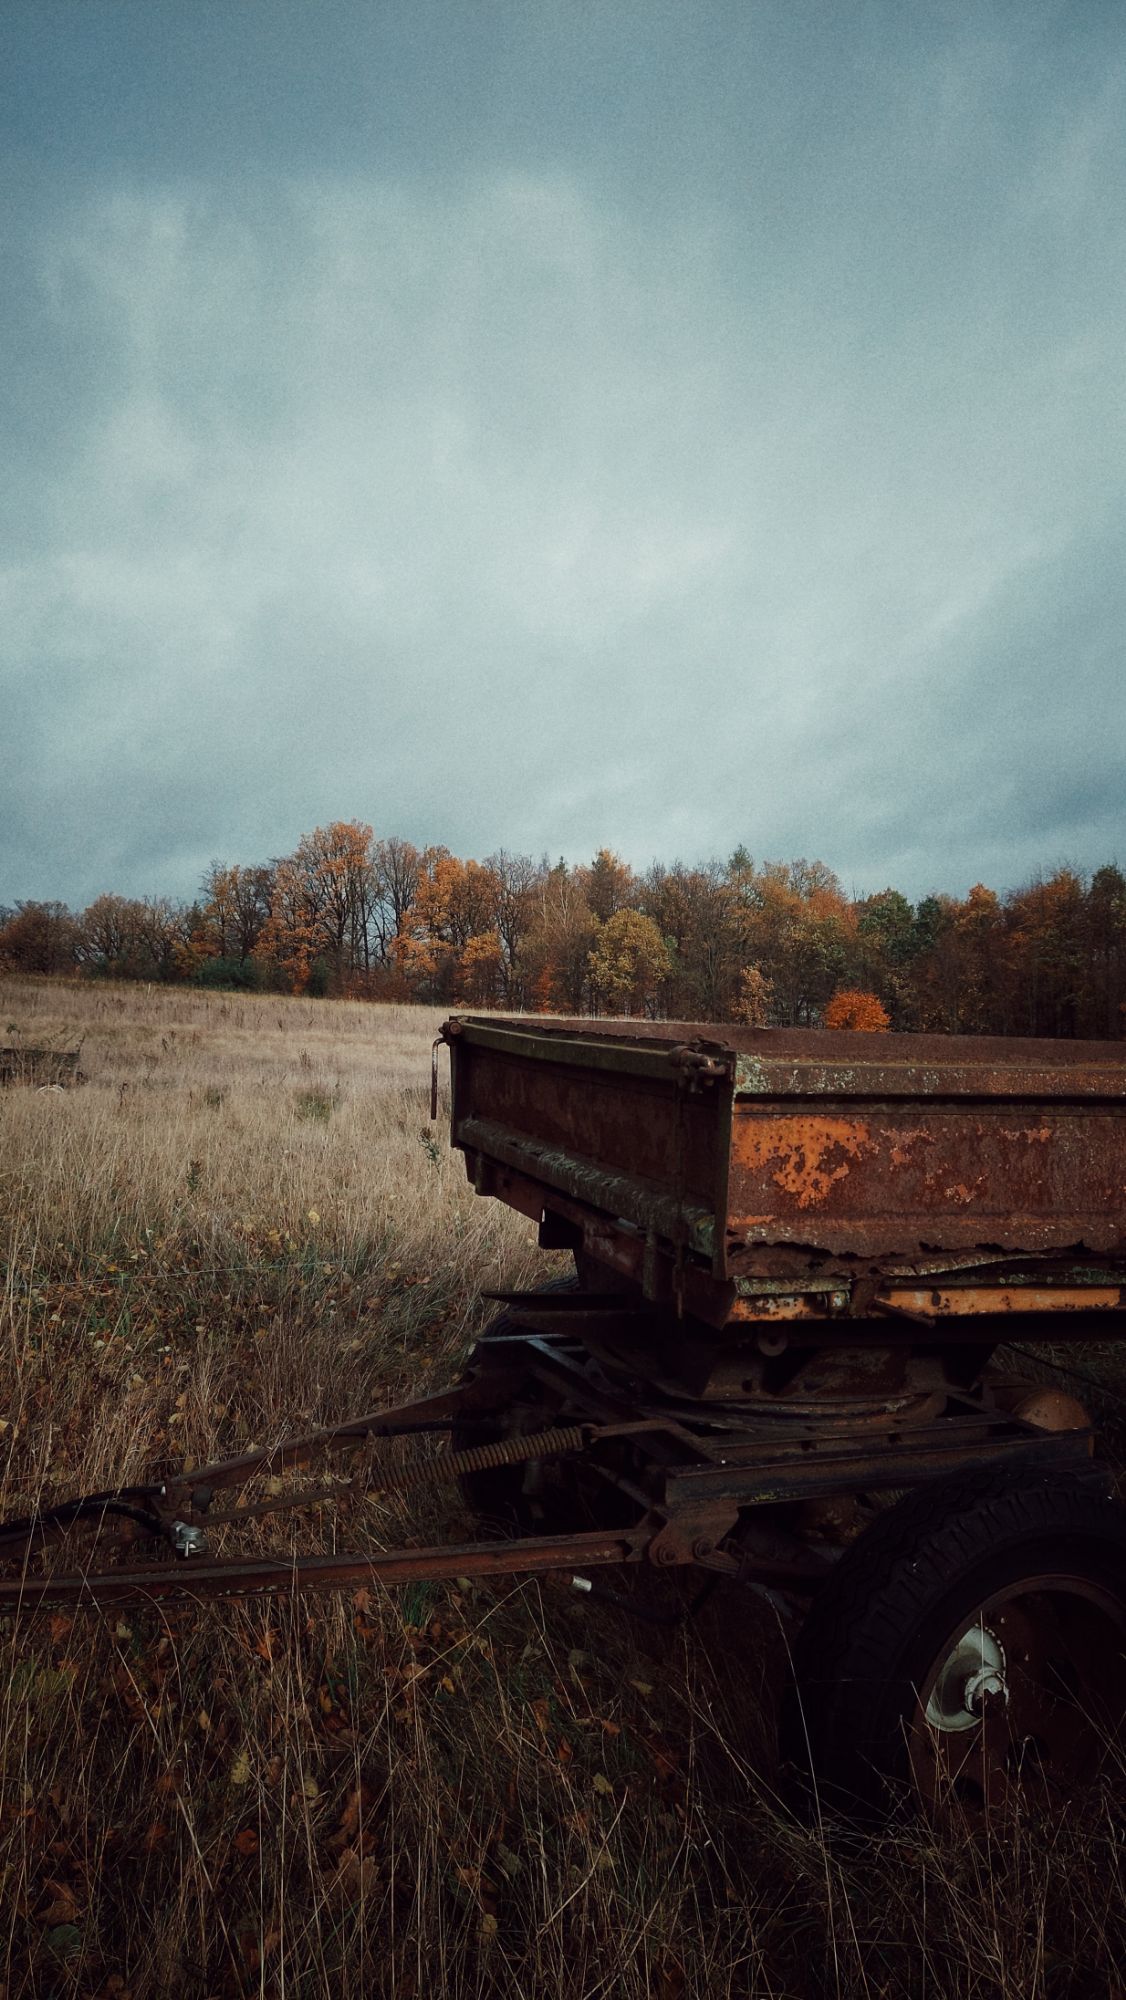 An old rusty trailer in front of a meadow and forest in autumn colors. Gray sky above the day.